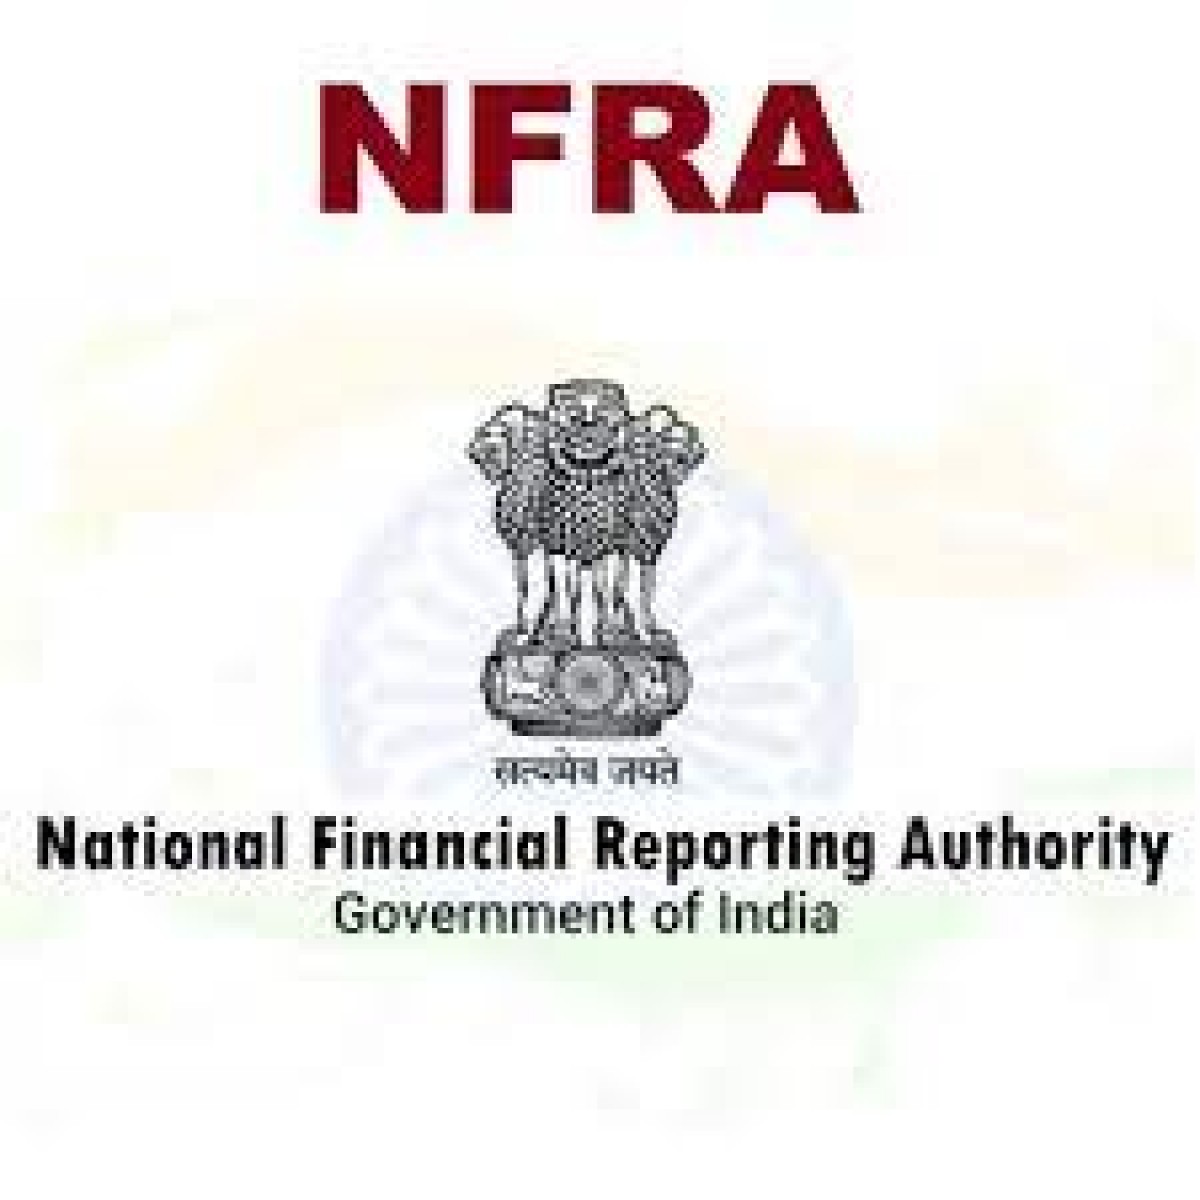 Whether the constitution of NFRA is constitutionally valid?